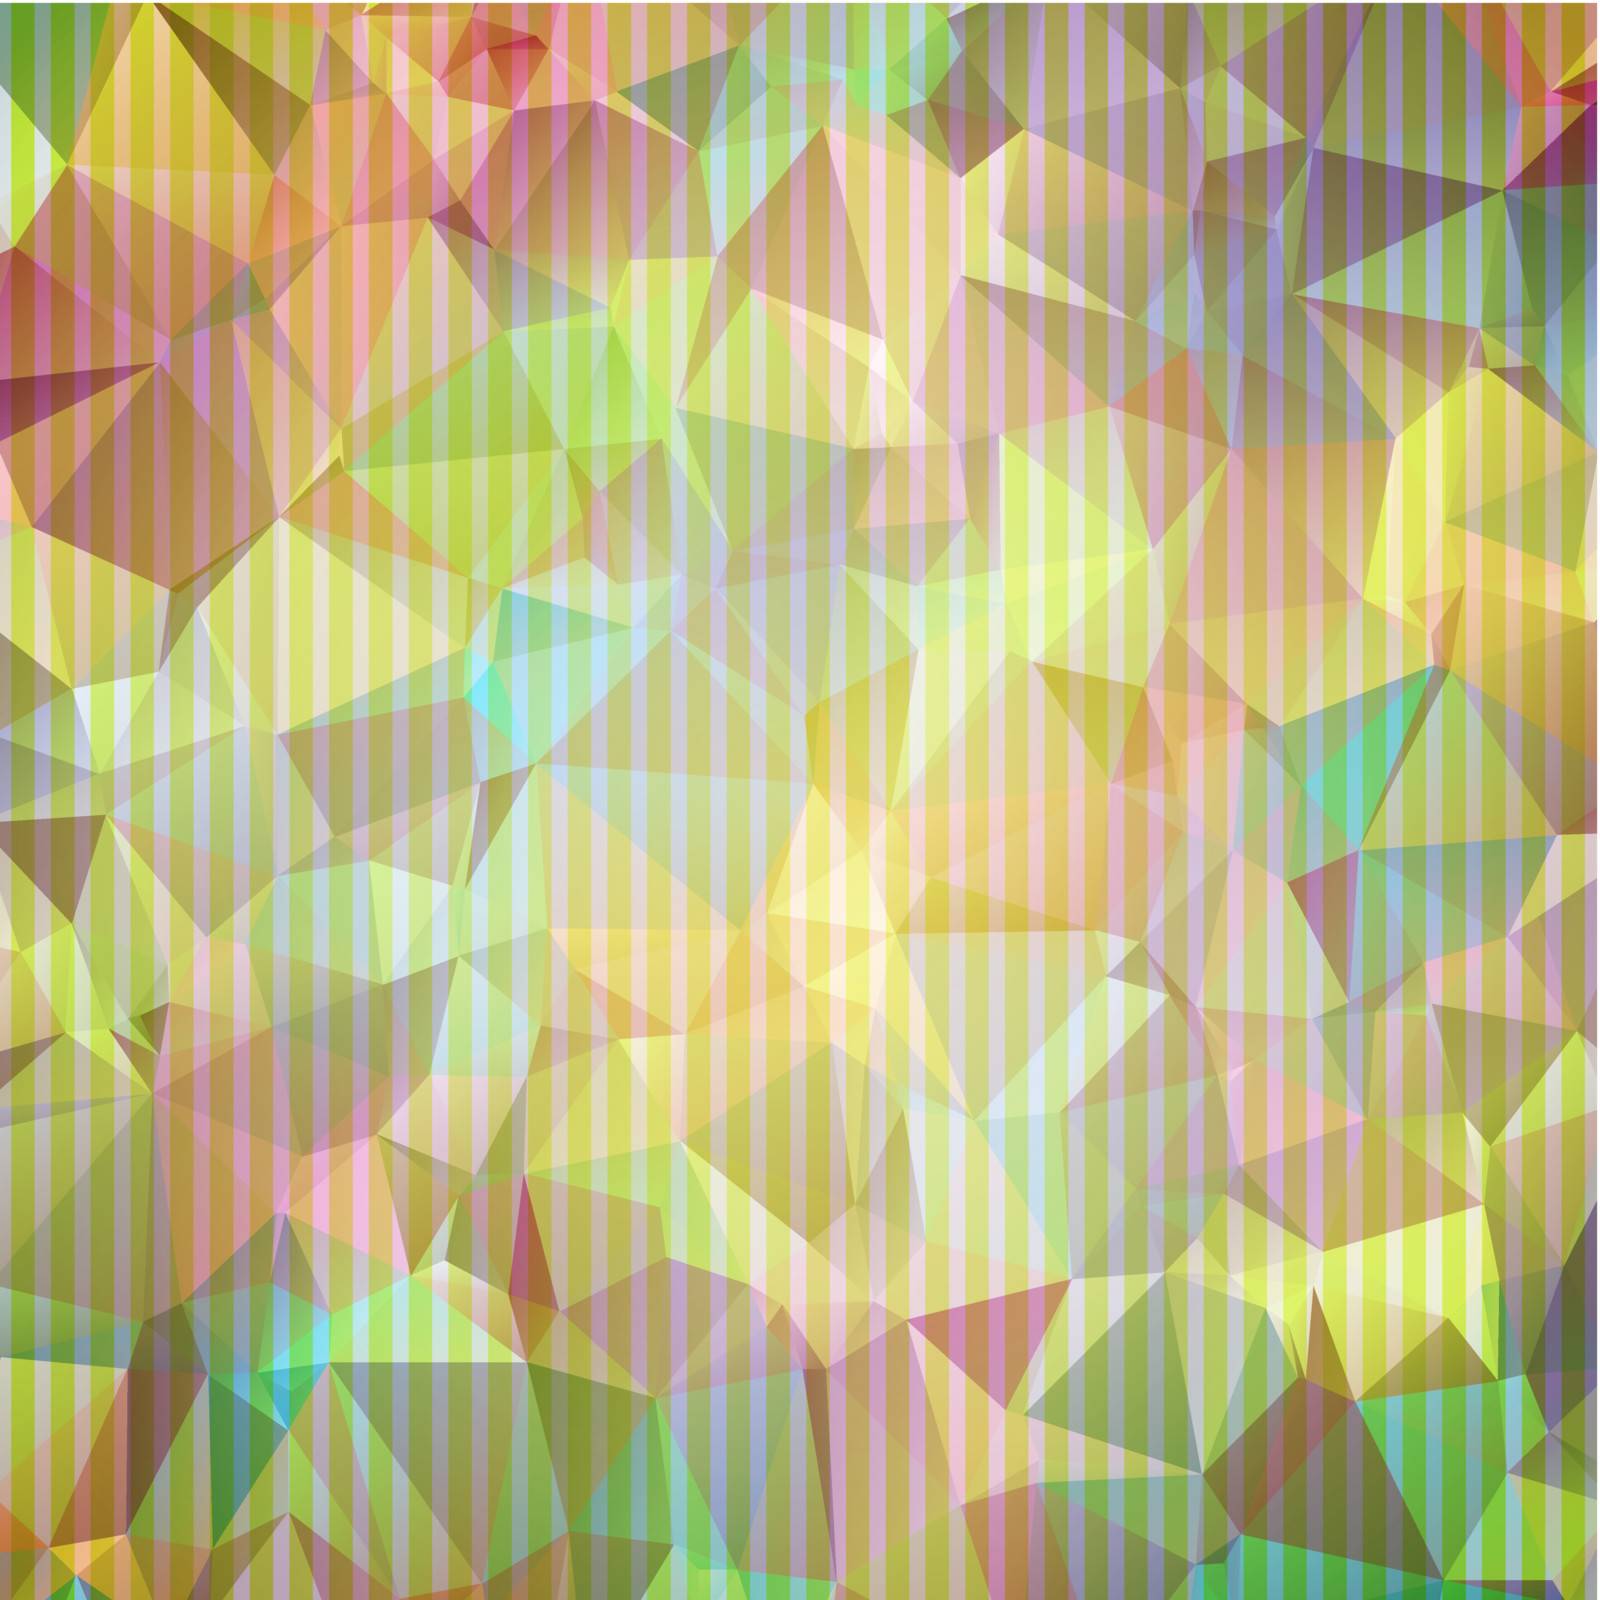 Abstract Geometrical Background by epic33